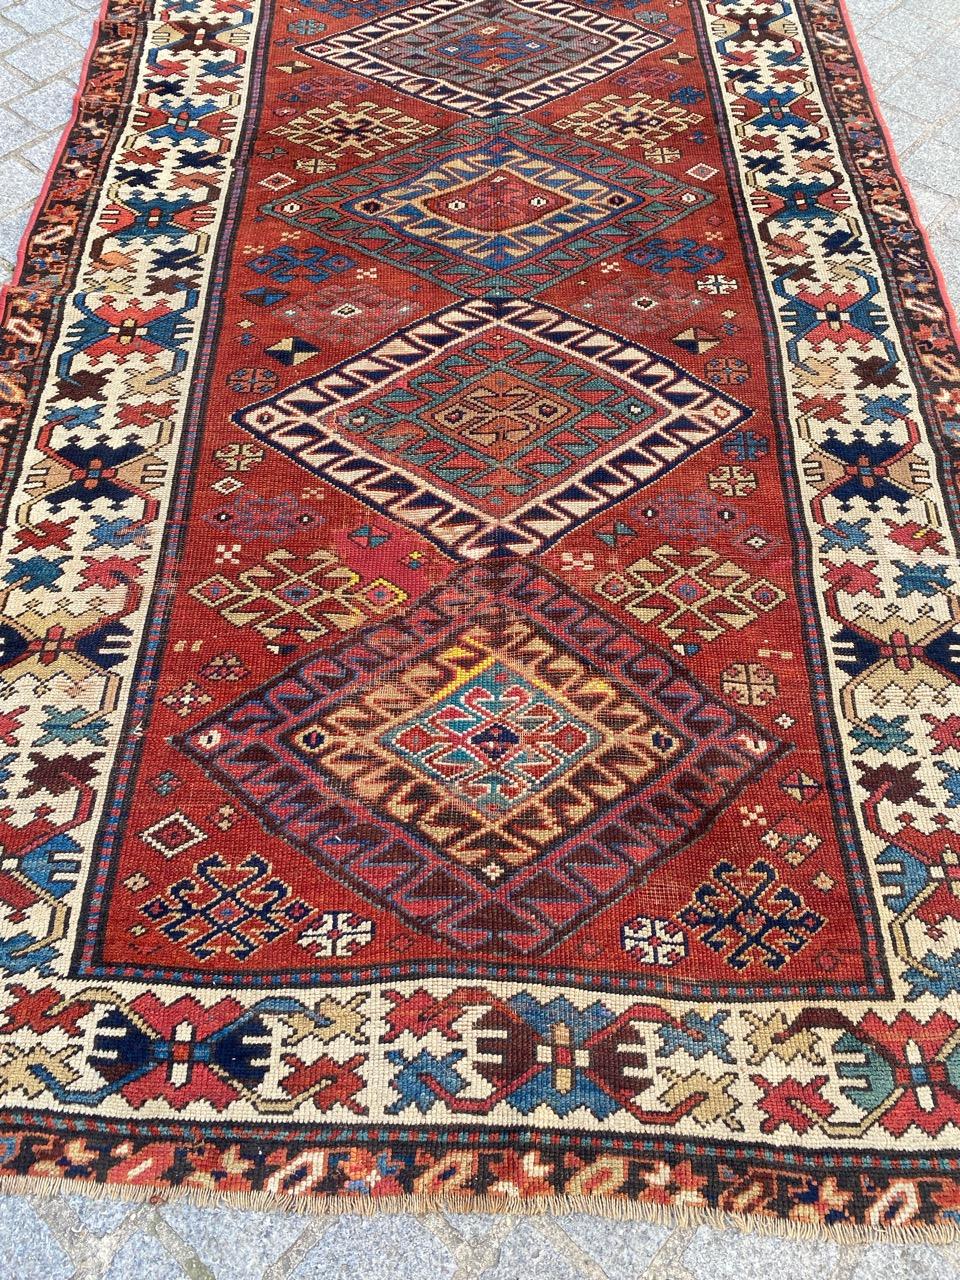 Nice late 19th century Caucasian Kazak runner with beautiful geometrical design and nice natural colors, entirely hand knotted with wool velvet on wool foundation.

✨✨✨
